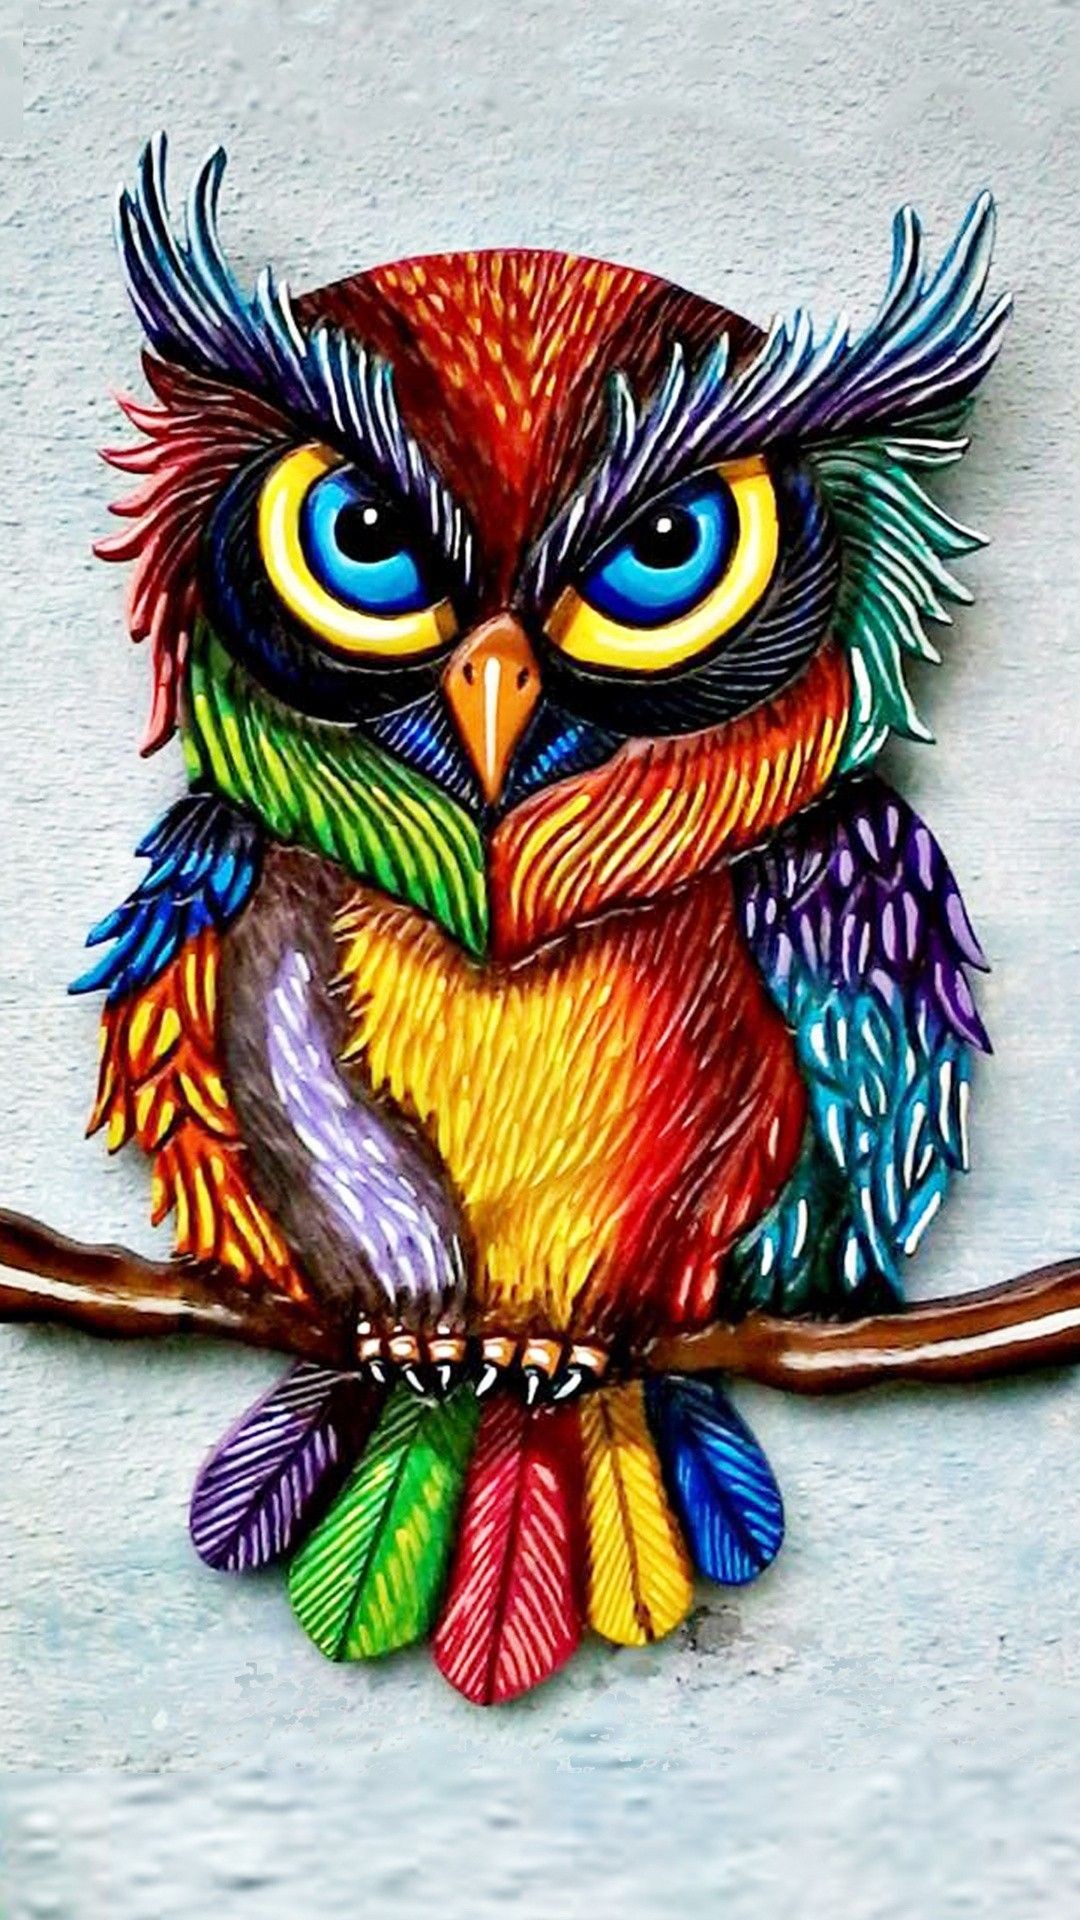 Owl Papercraft Colorful Give A Hoot Pinterest